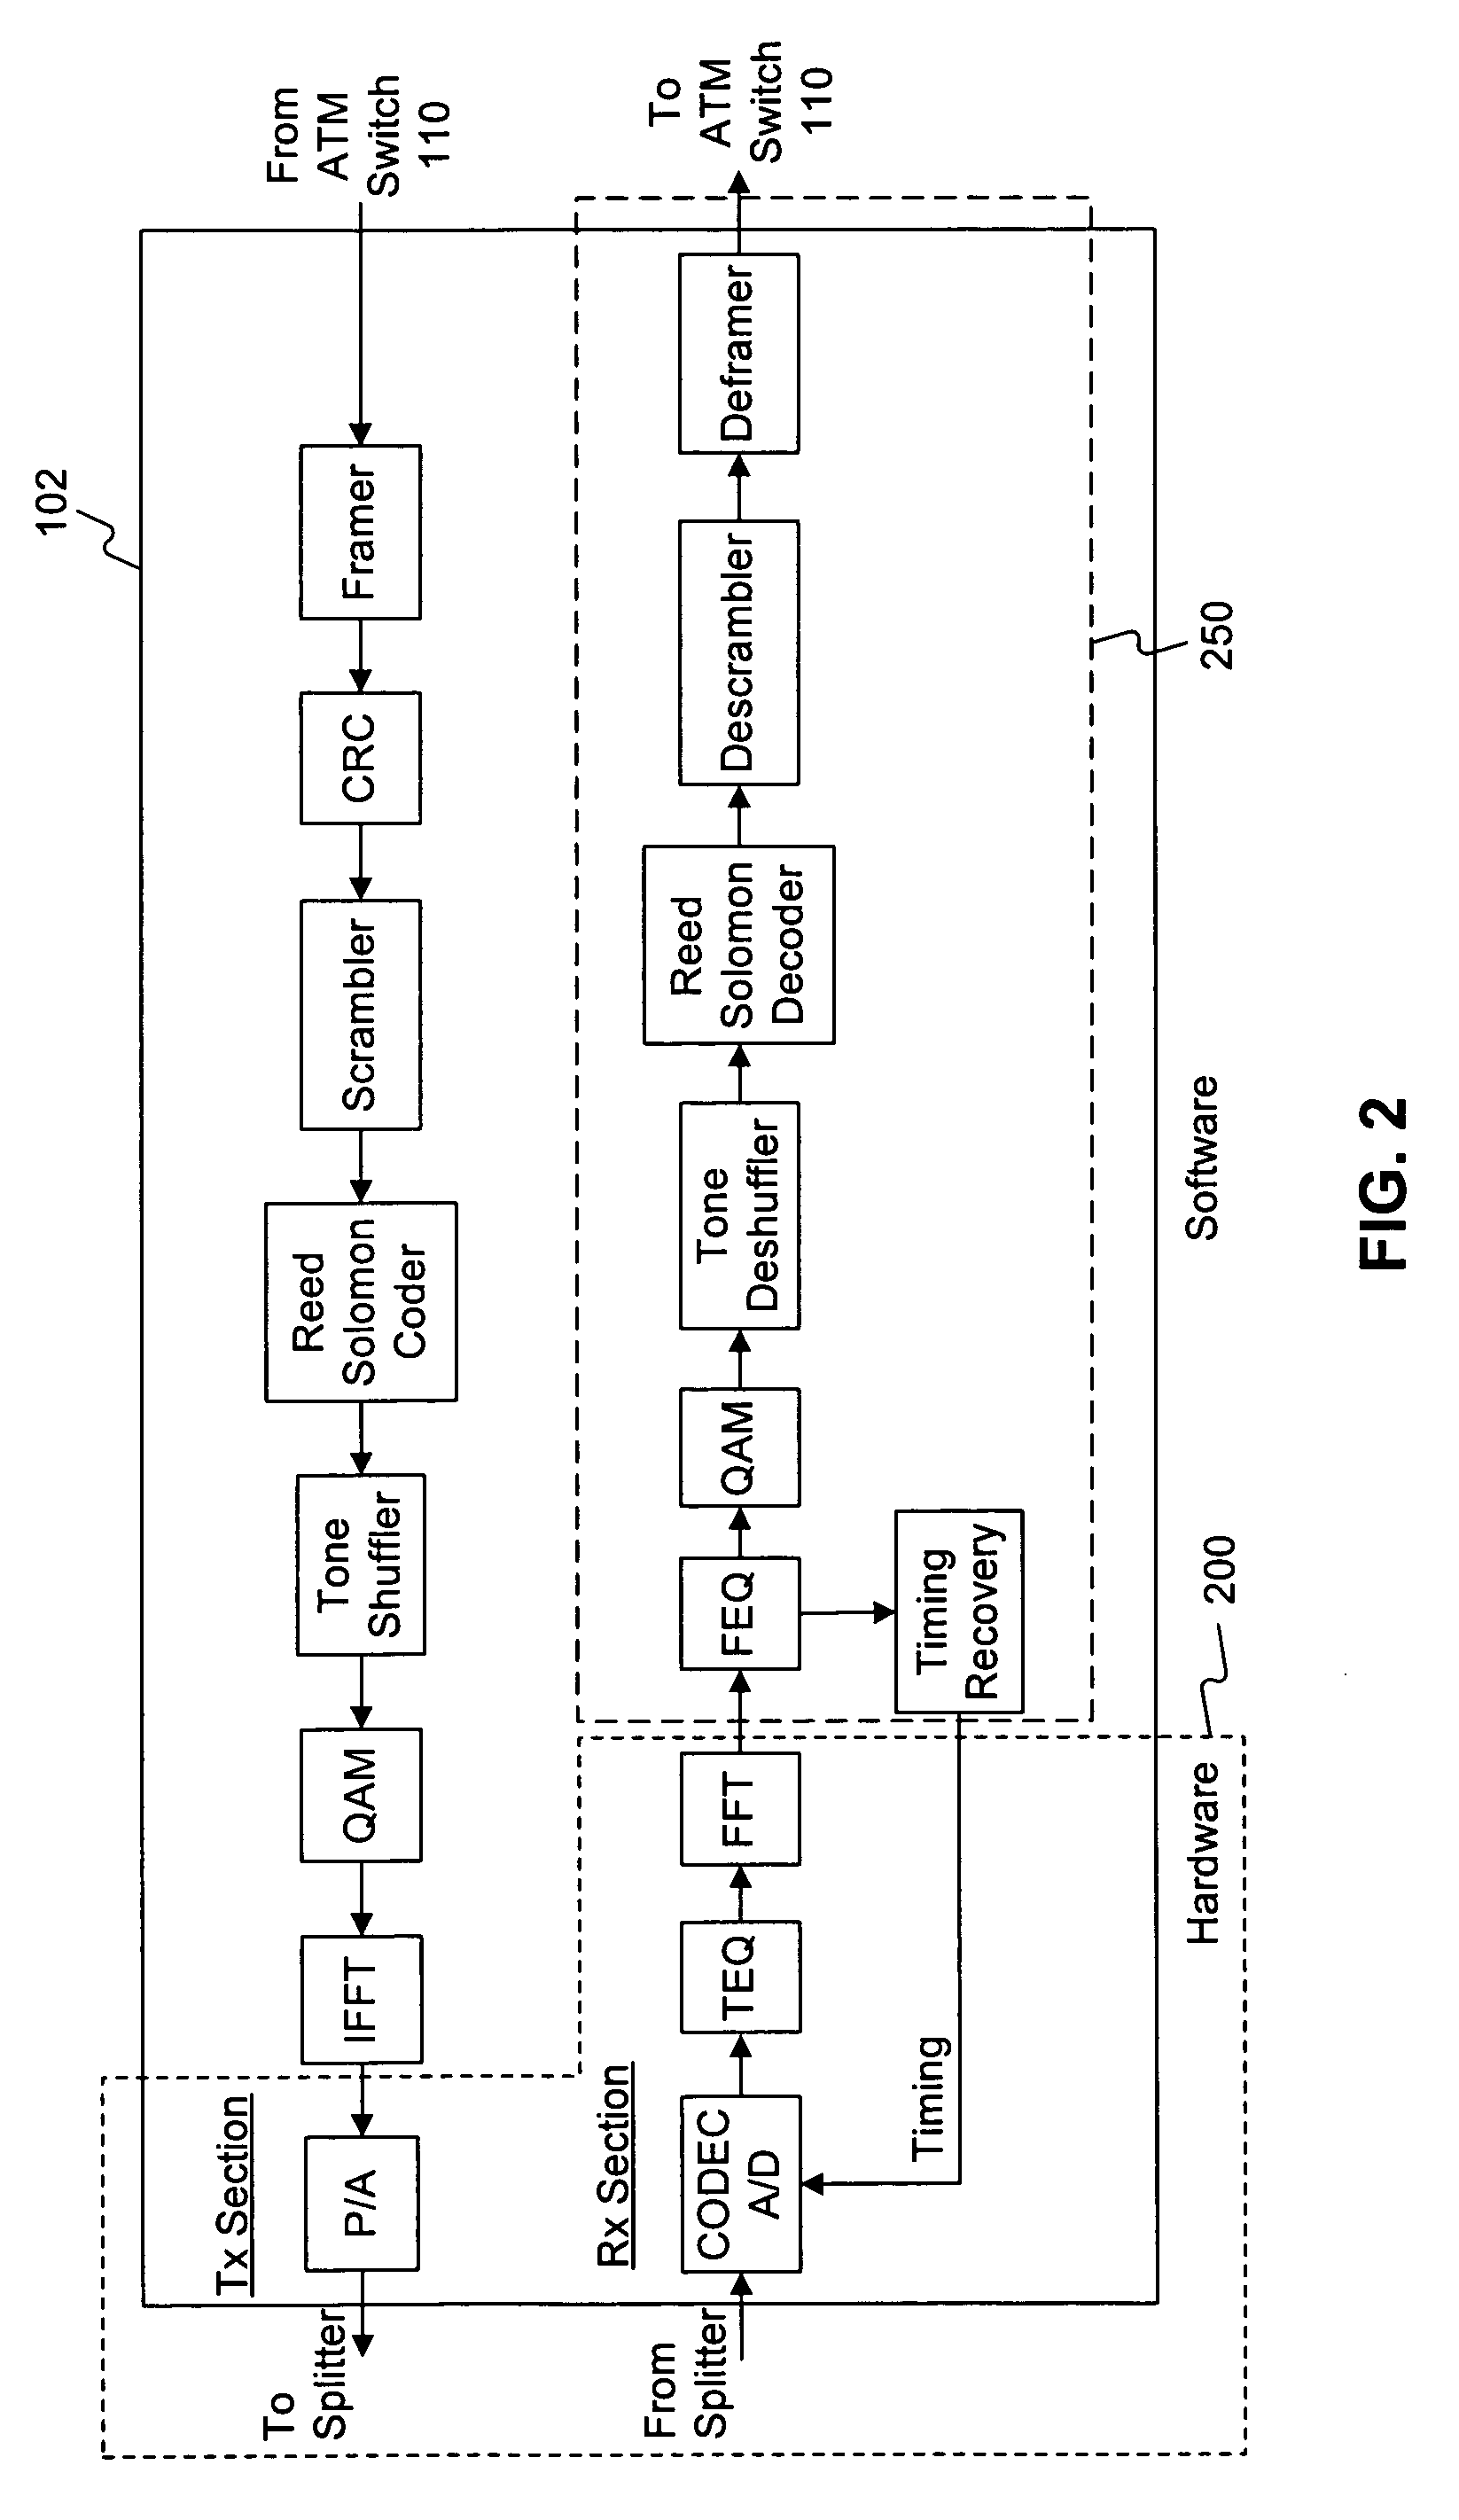 Automatic data CPU load reduction in a host-signal processing (HSP) based ADSL modem